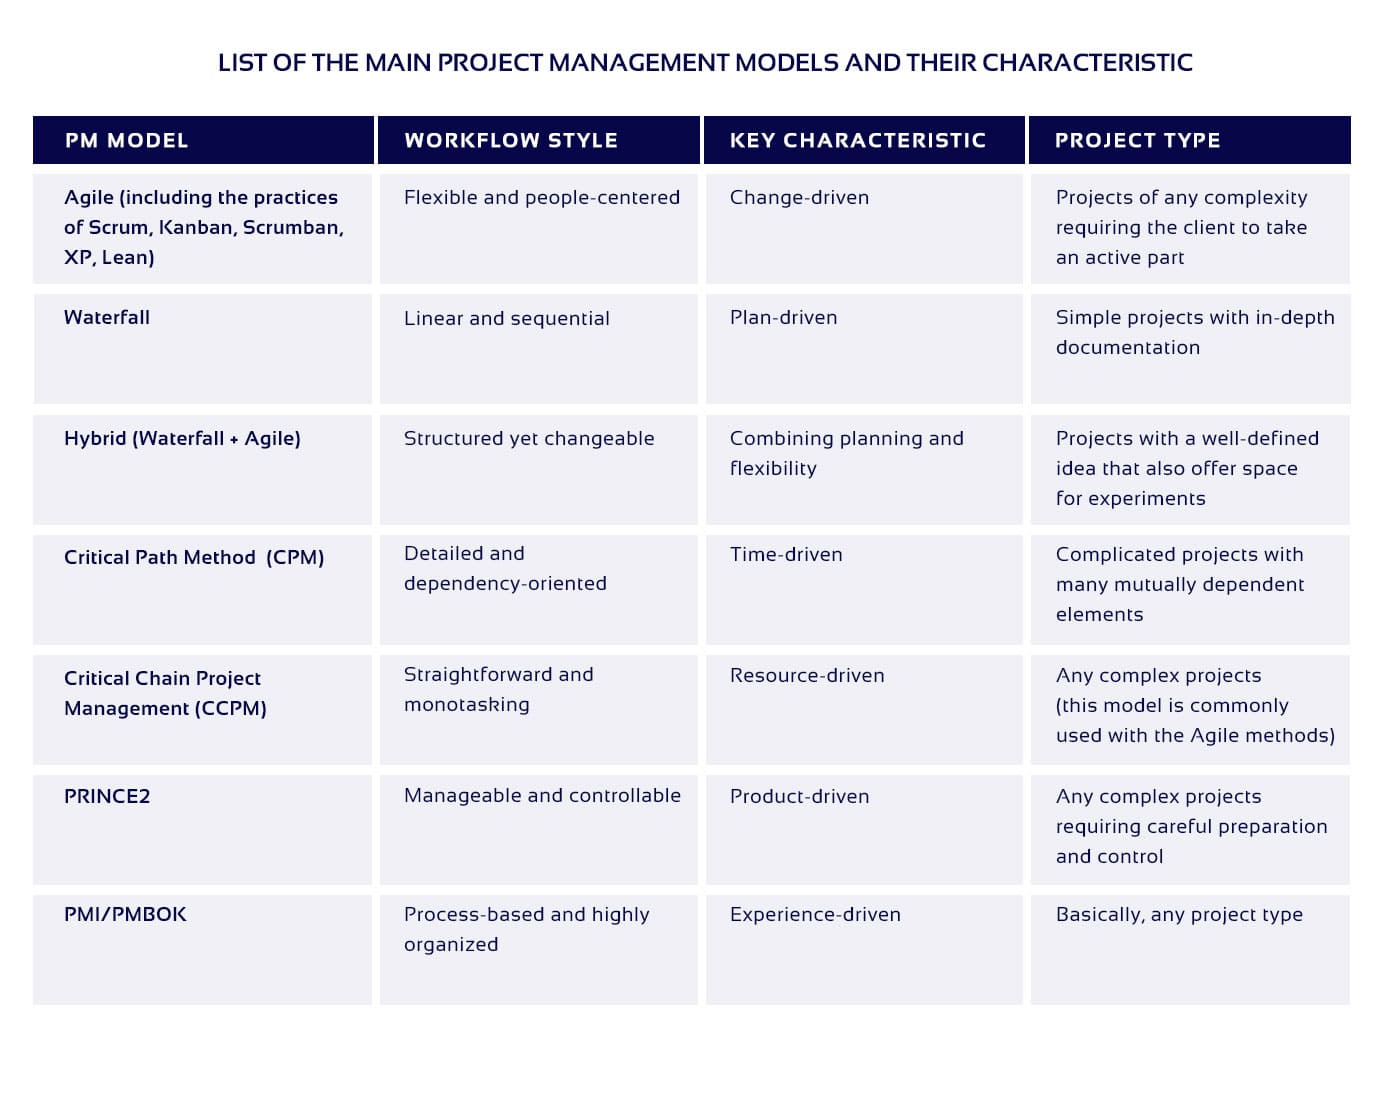 The table of main PM models characteristics